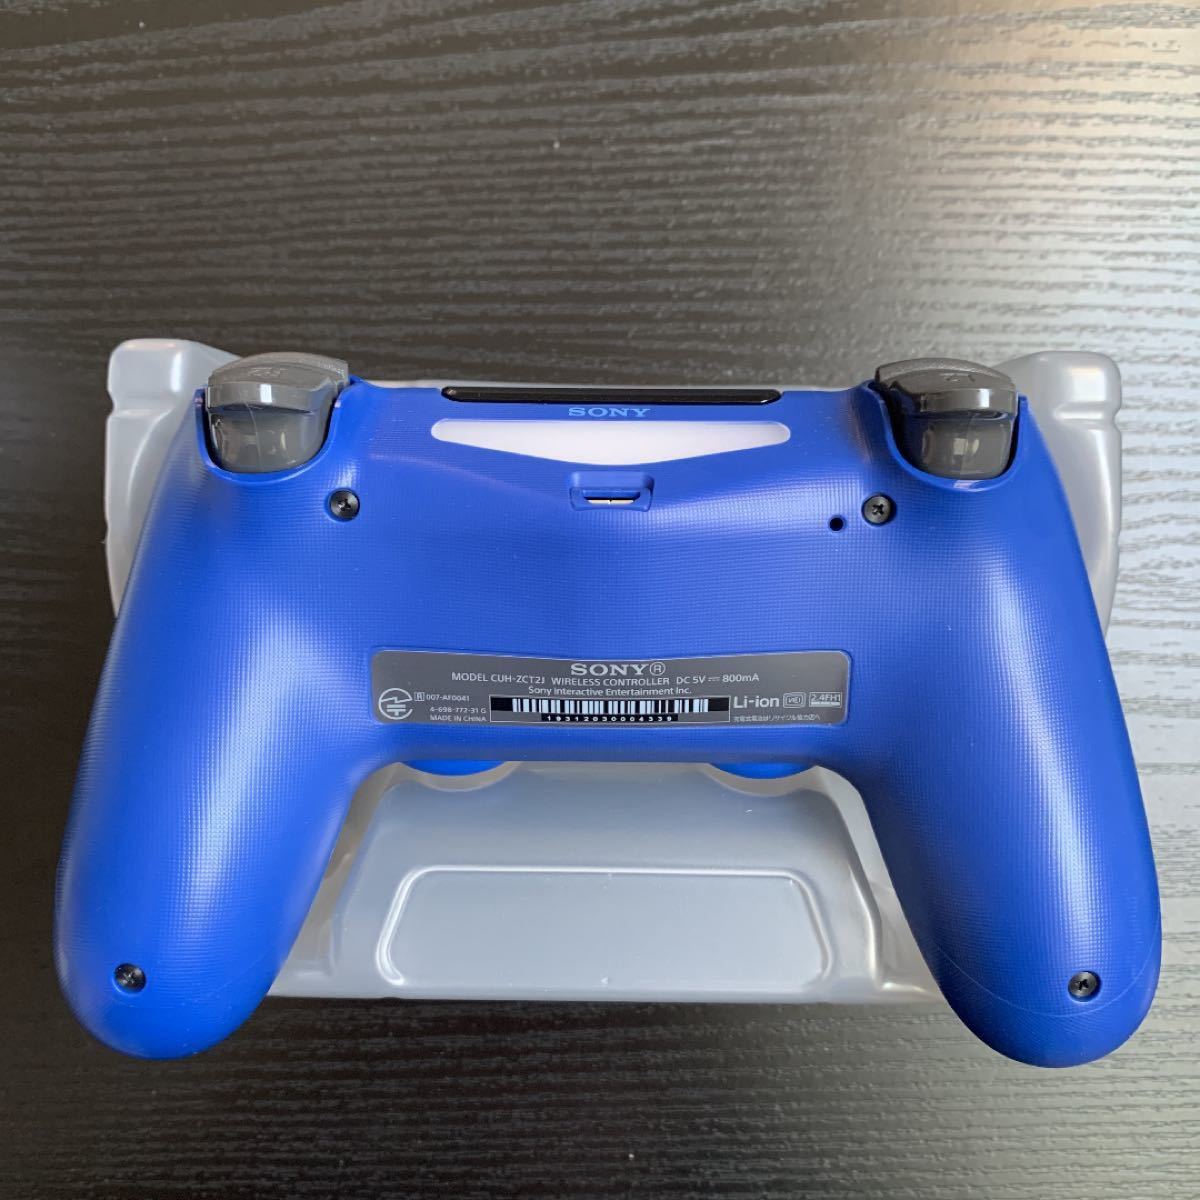 SONY PS4 ワイヤレスコントローラー DUALSHOCK4 Wave Blue